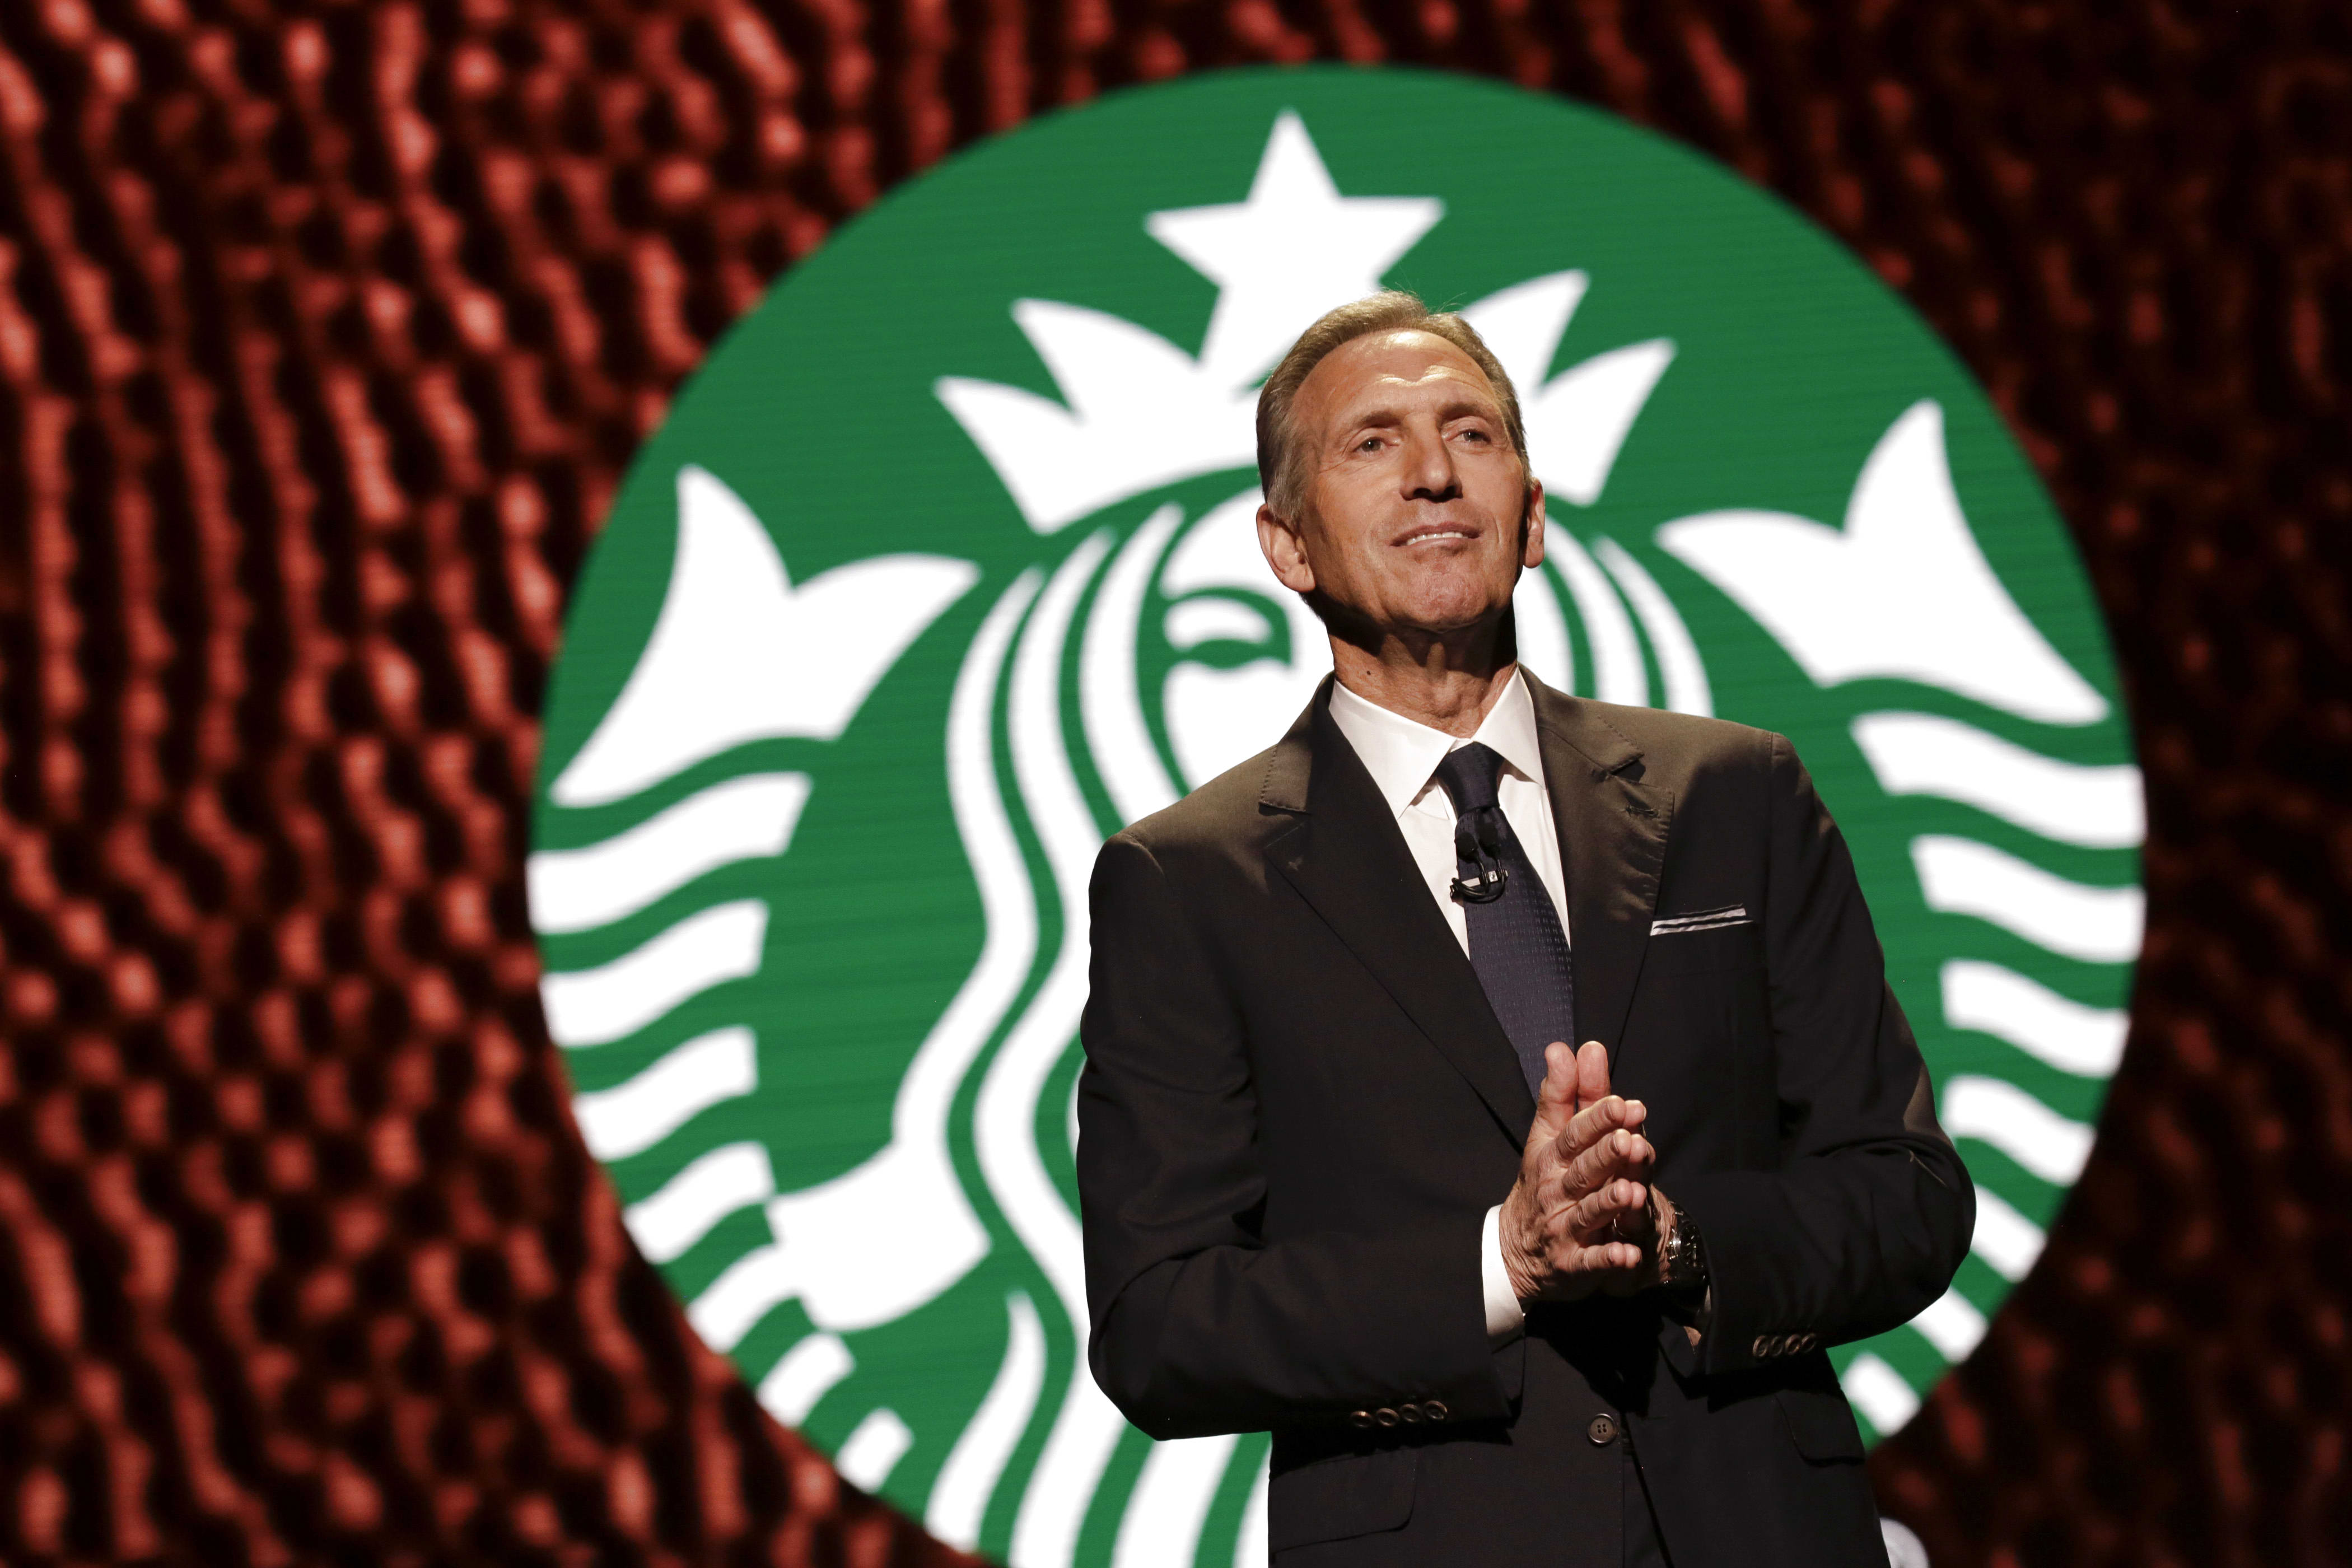 Former Starbucks CEO Howard Schultz Steps Down from Company’s Board: Planned Transition and New Leadership at Starbucks